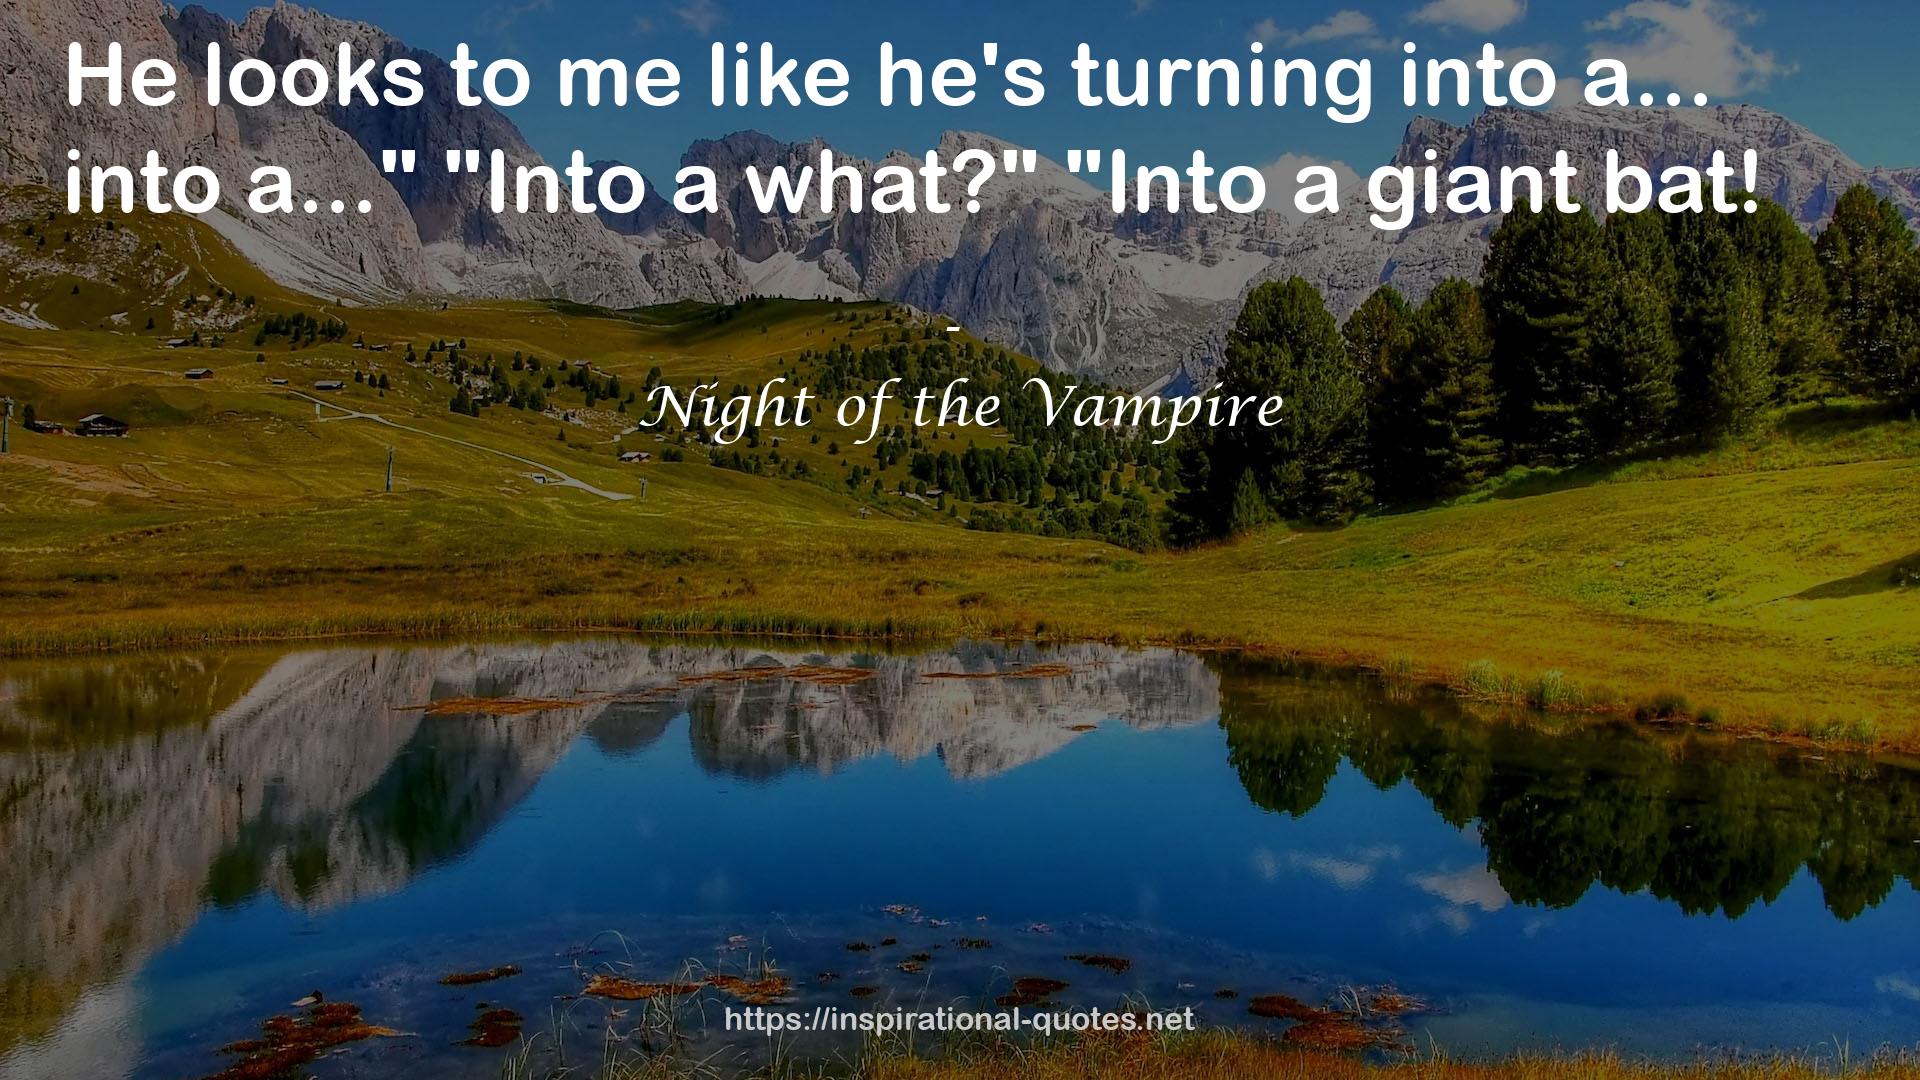 Night of the Vampire QUOTES